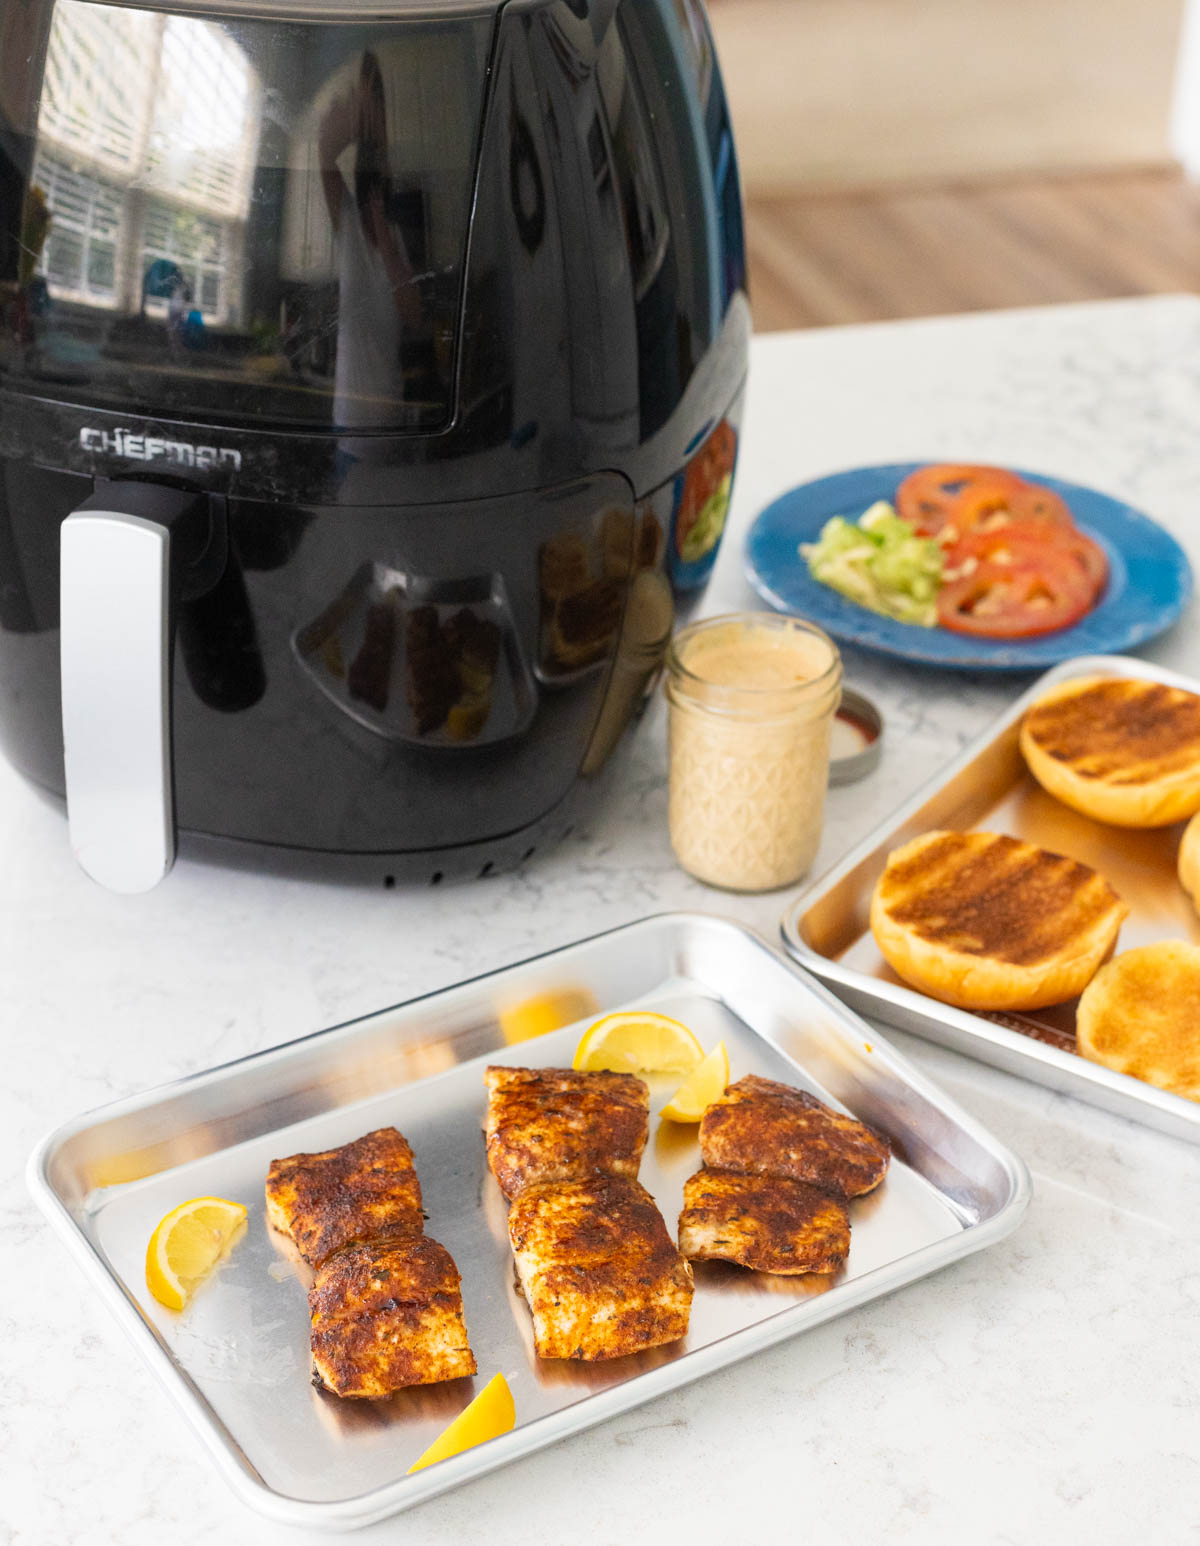 The cooked fish, buns, and sandwich toppings are on display in front of the air fryer.